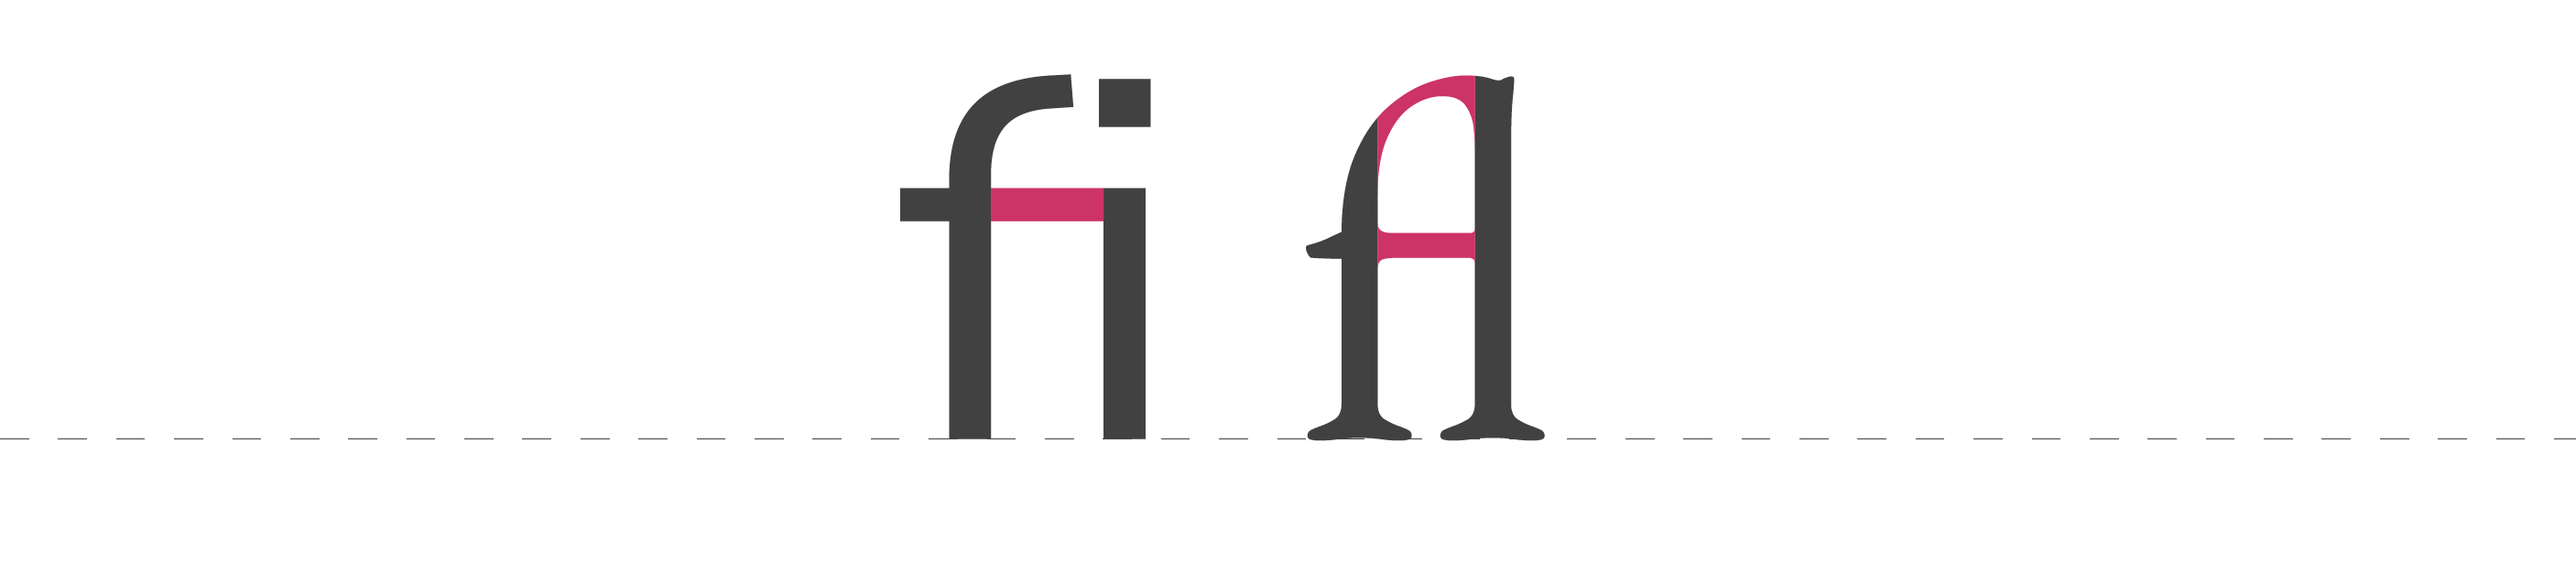 Ligatures occur when two or more letters are joined to create one single glyph